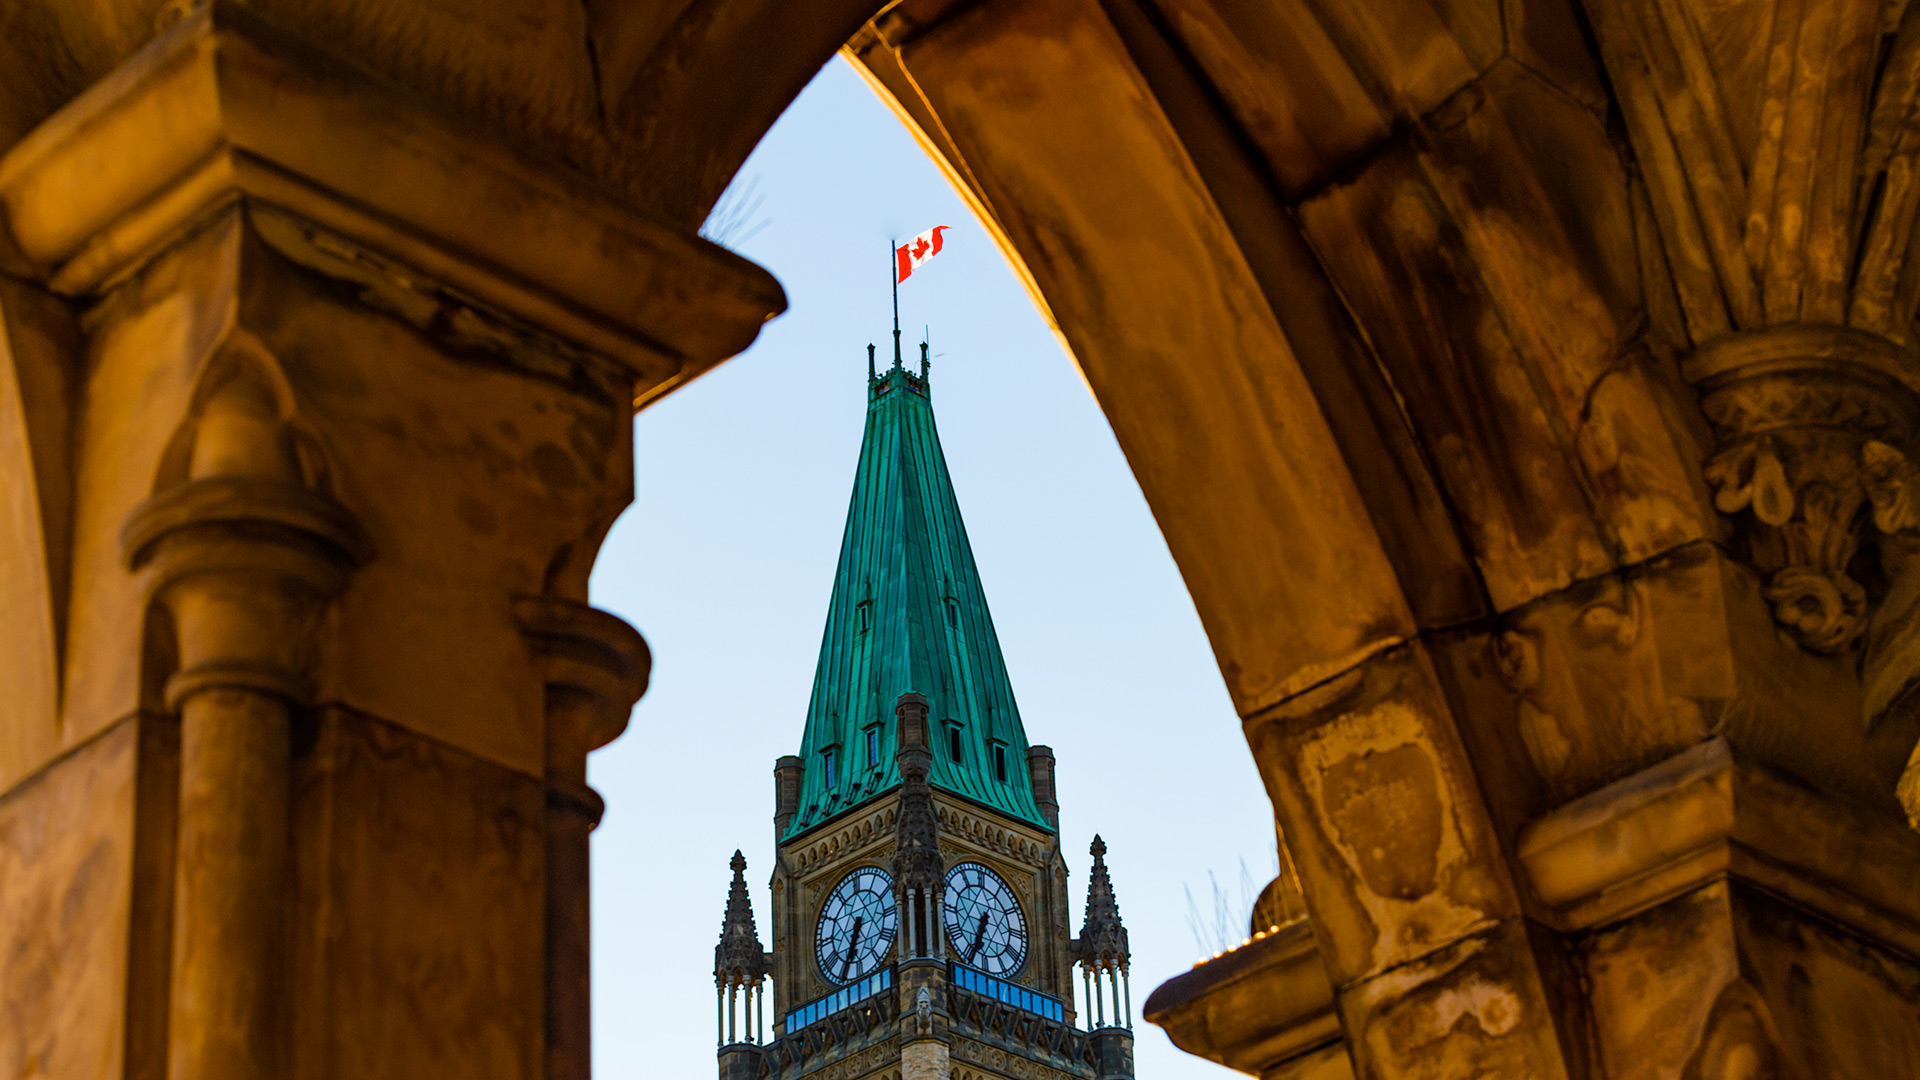 Canadian flag on top of Parliament building peeking through arch of other building